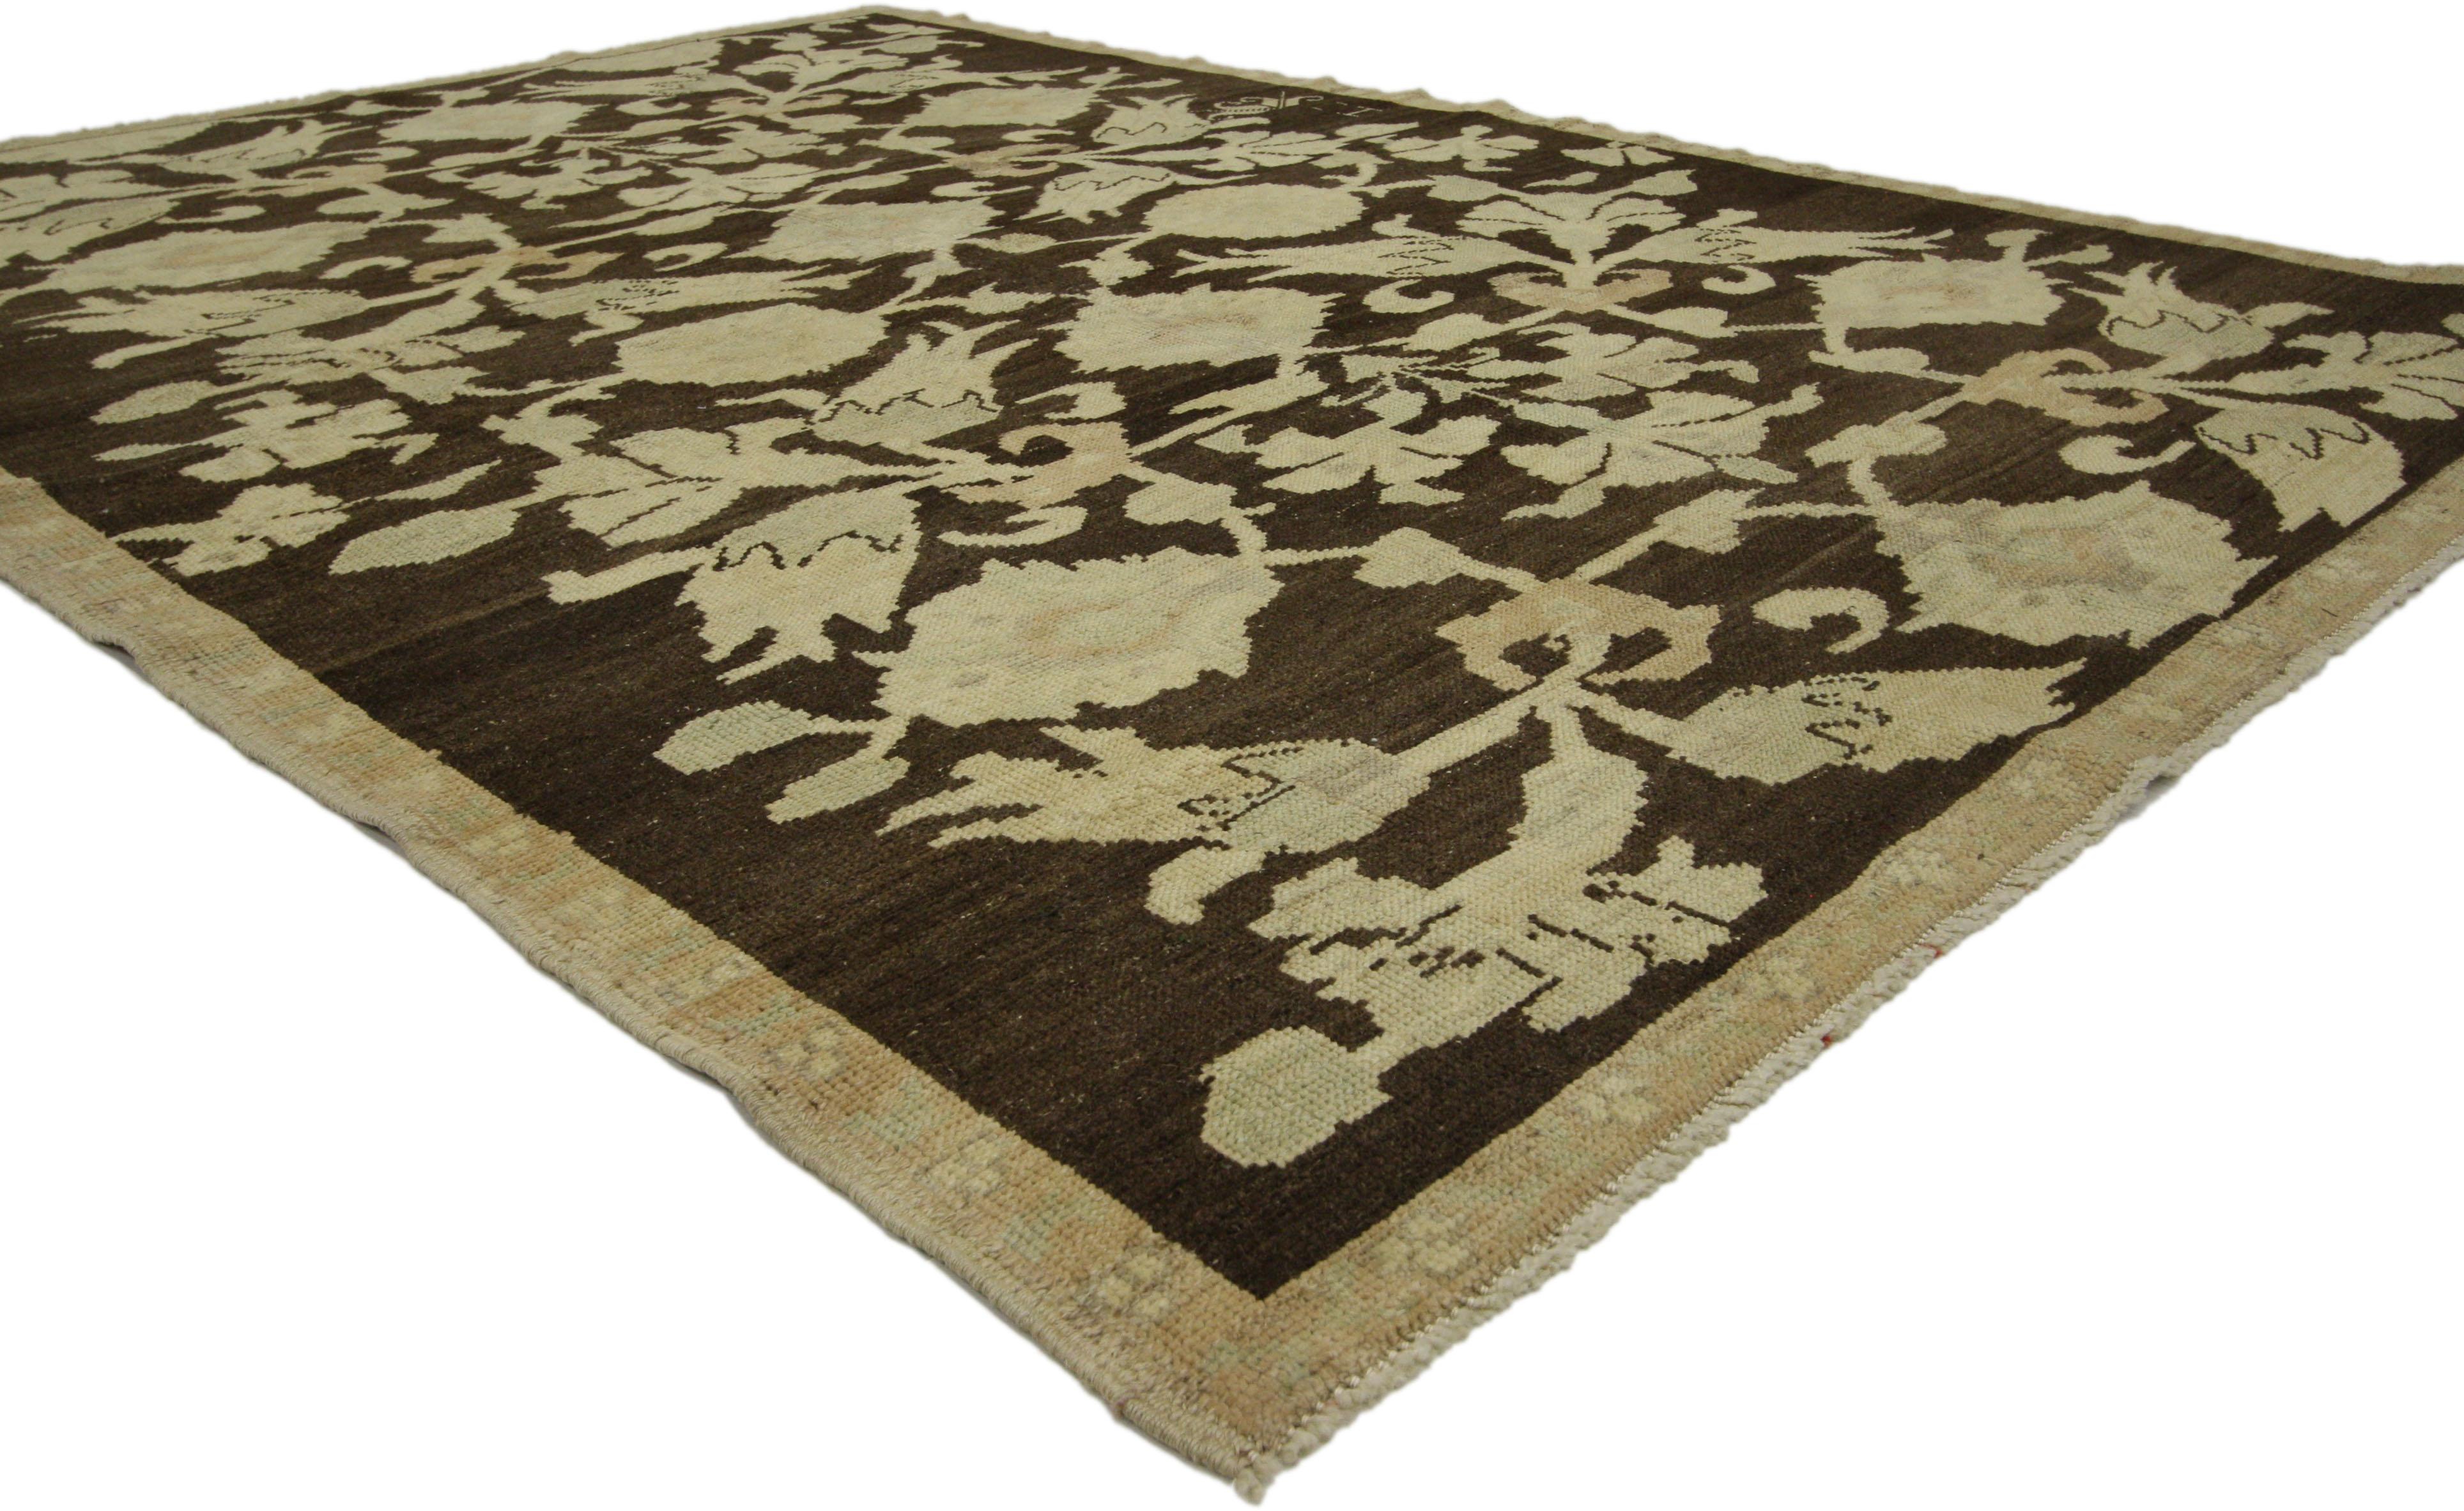 50847, vintage Turkish Oushak rug with Swedish cottage style. This gorgeous authentic hand knotted wool vintage Turkish Oushak rug features all the charms of Swedish Cottage style. Soothing colors evoke calm and balance. The palette provides a soft